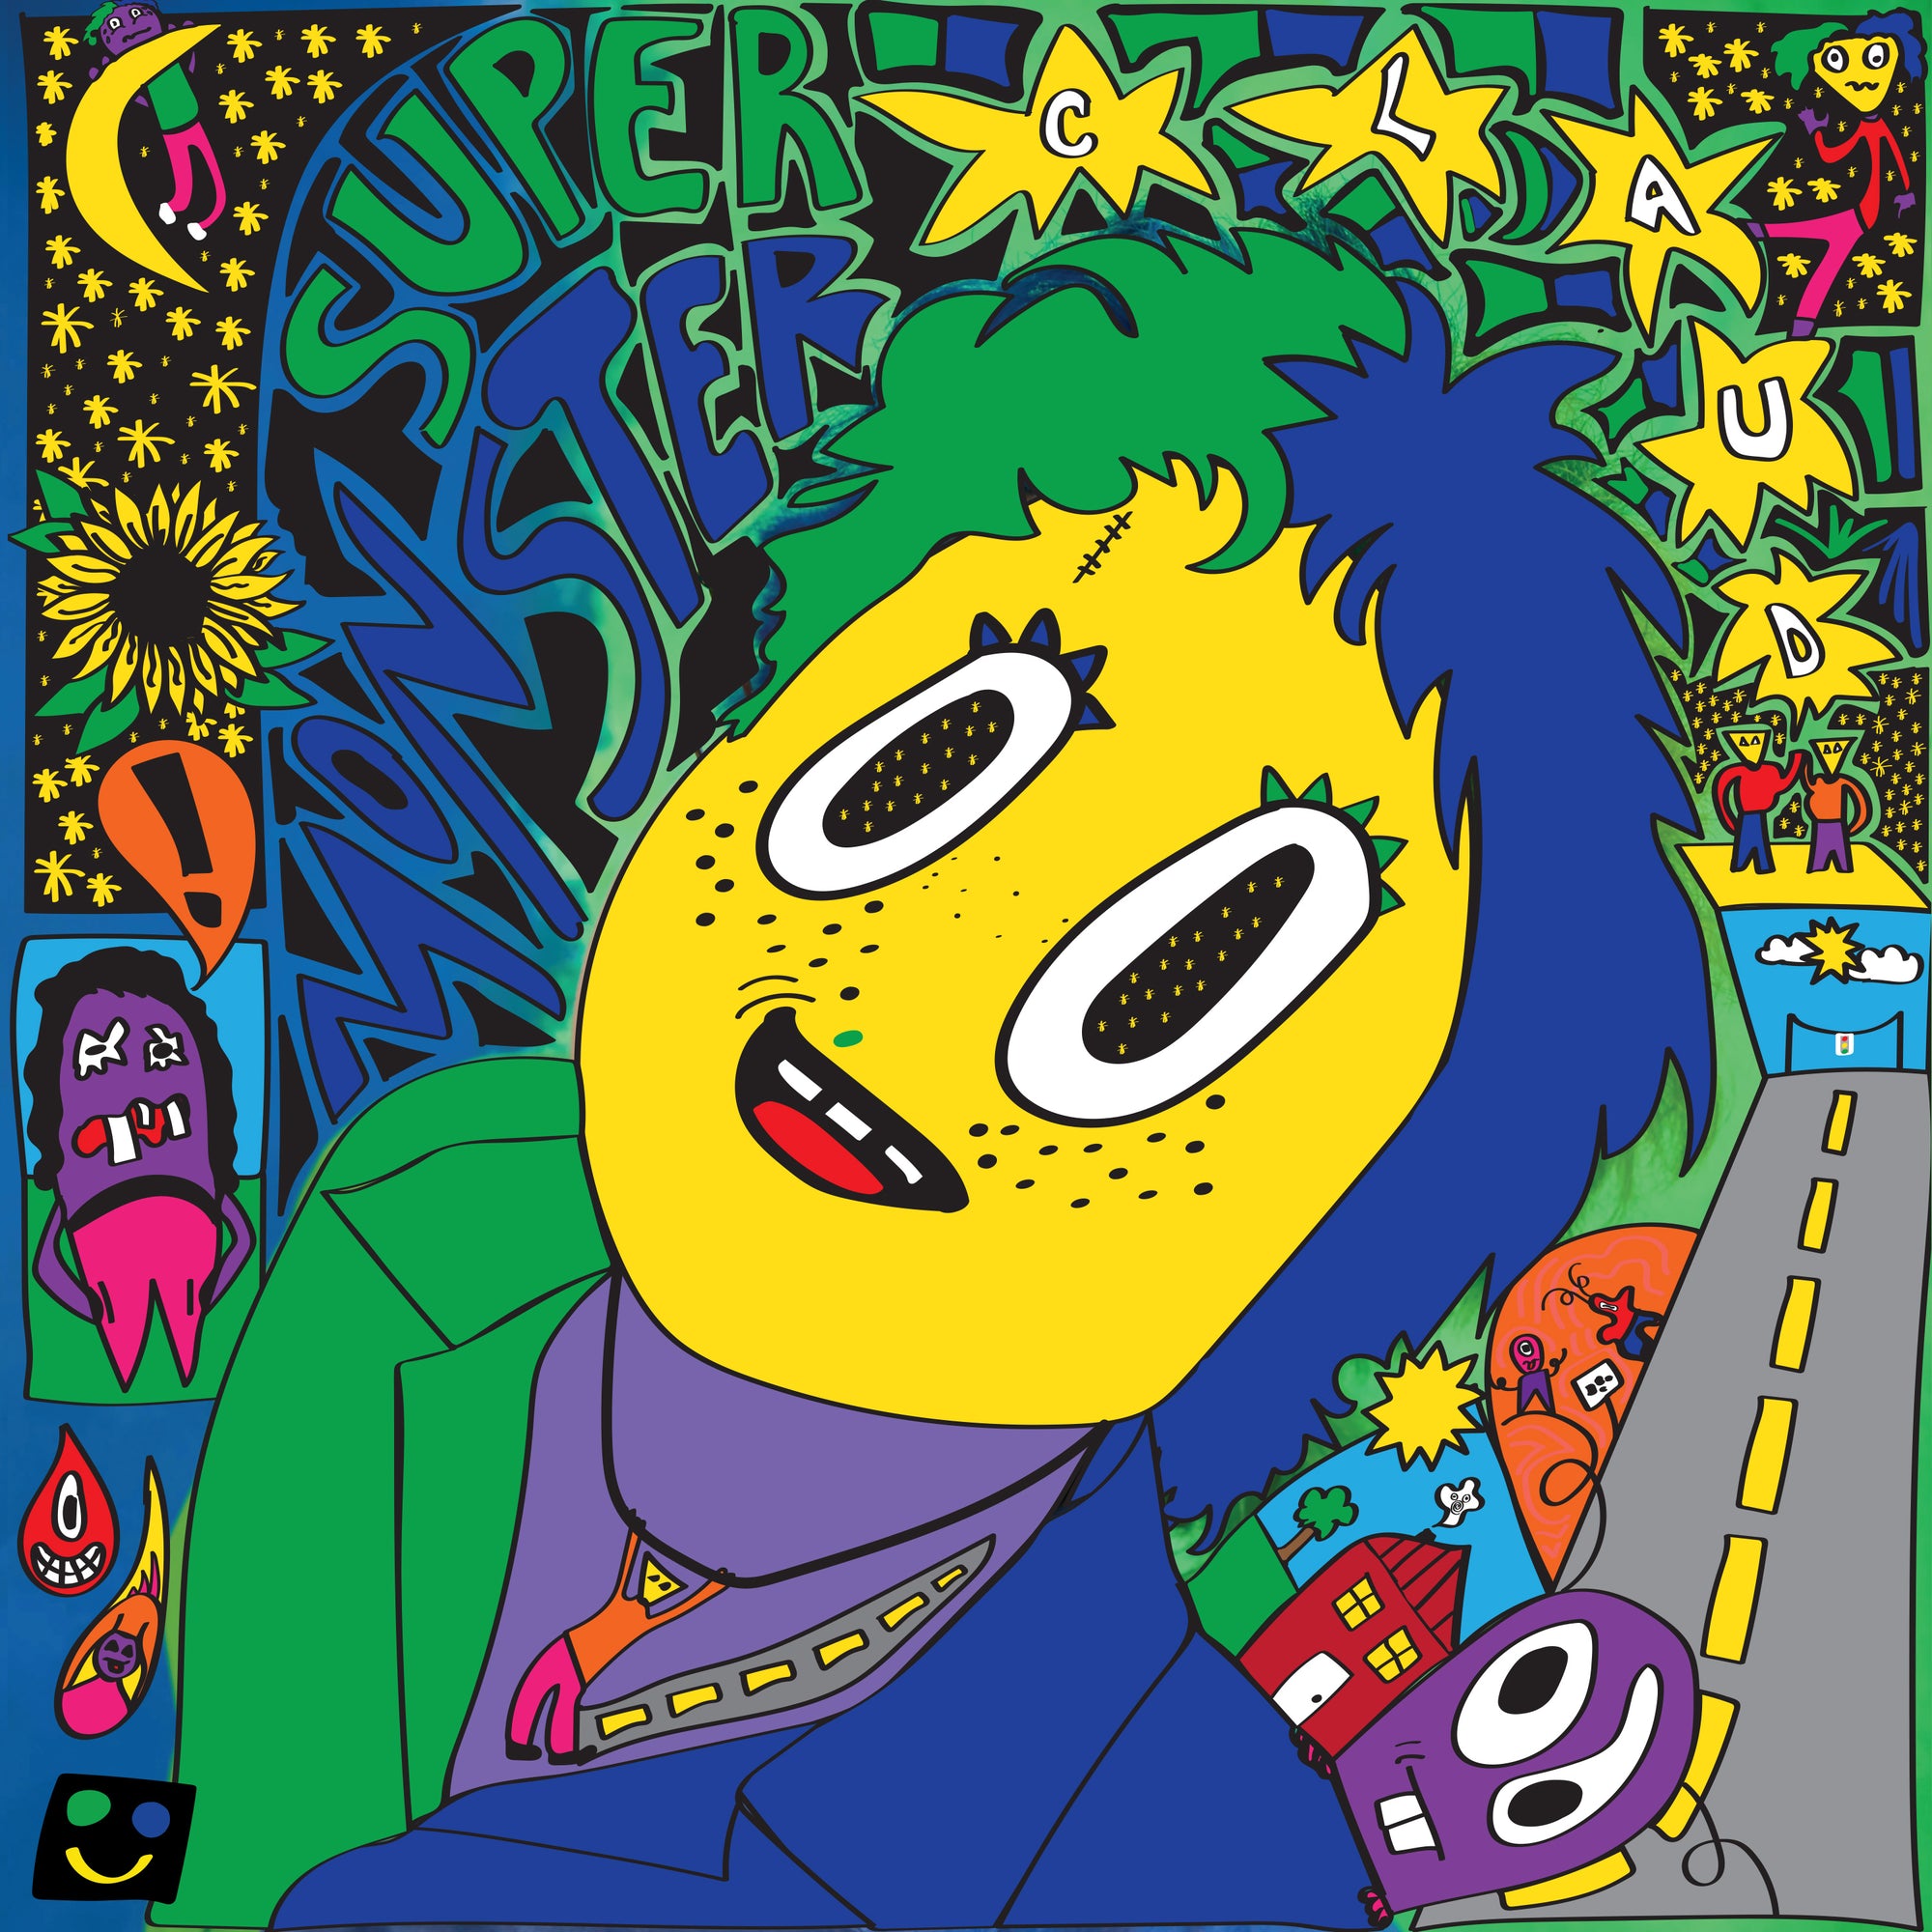 Colorful pop art style illustration featuring a large, yellow-faced character with blue hair and black eyes, surrounded by various colorful, cartoonish elements and the words "Tandem Coffee Roasters - Super Monster" in bold.